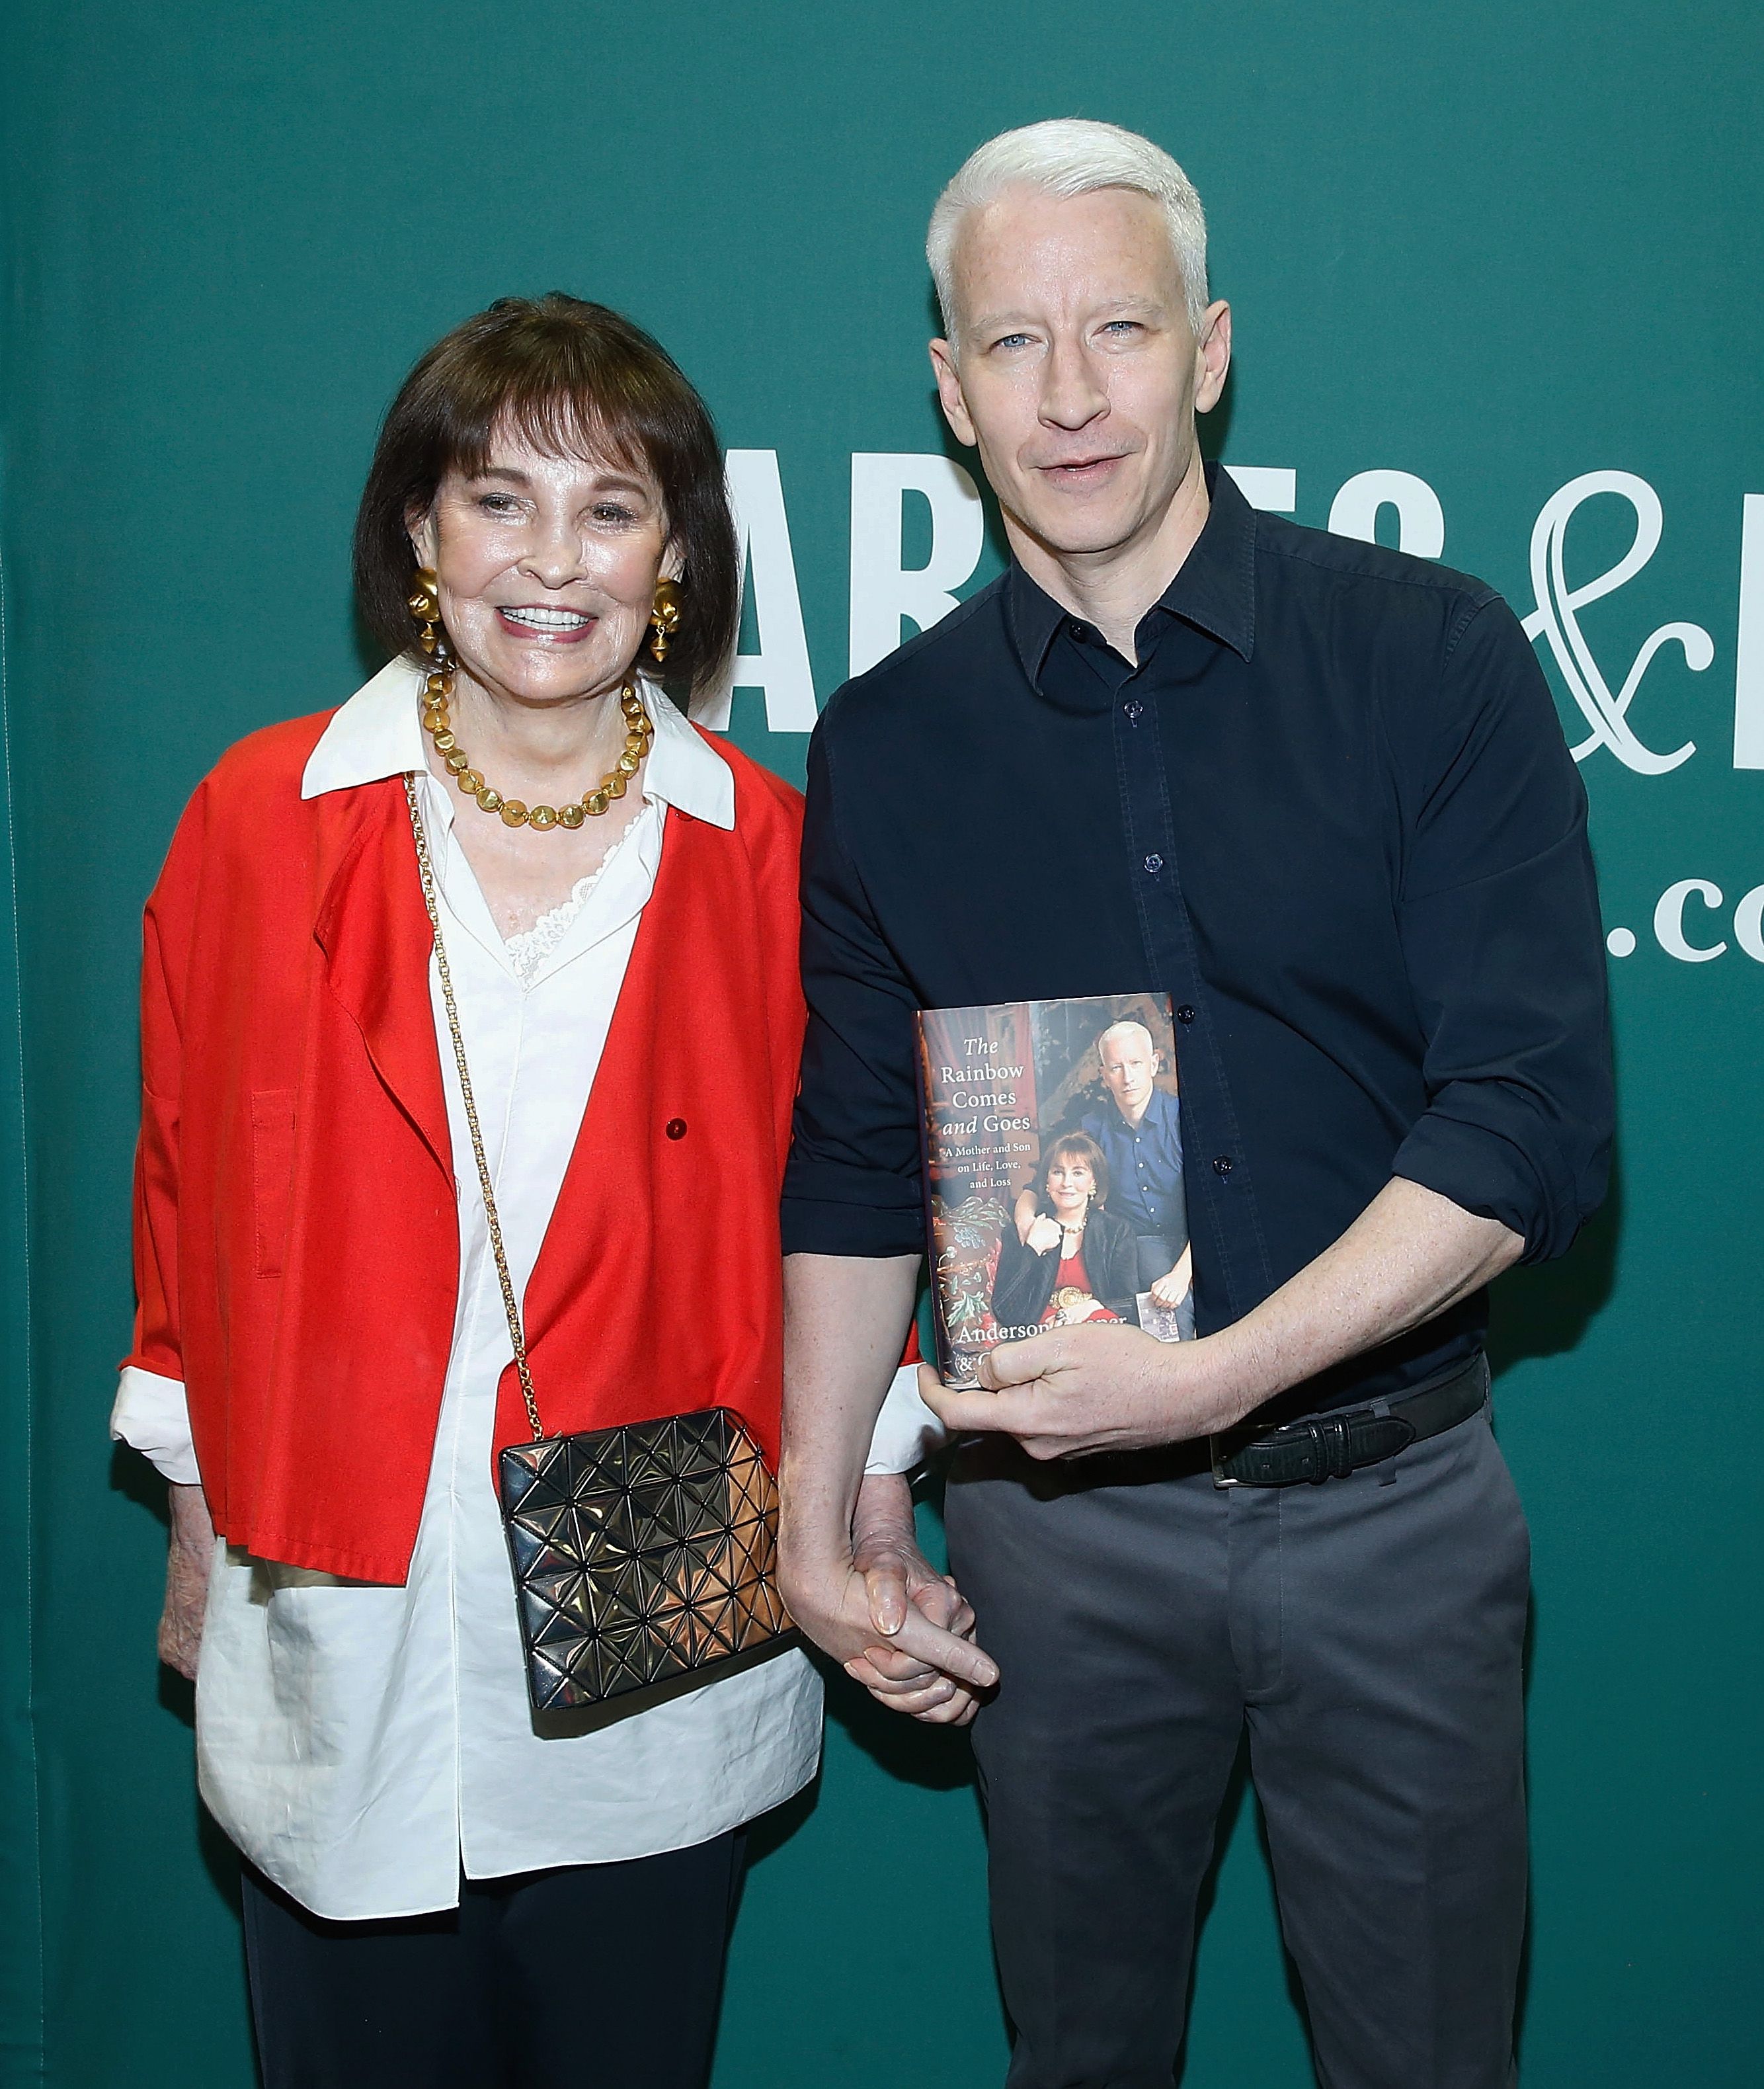 Gloria Vanderbilt and Anderson Cooper in conversation at Barnes & Noble Union Square on April 7, 2016, in New York City | Photo: John Lamparski/Getty Images